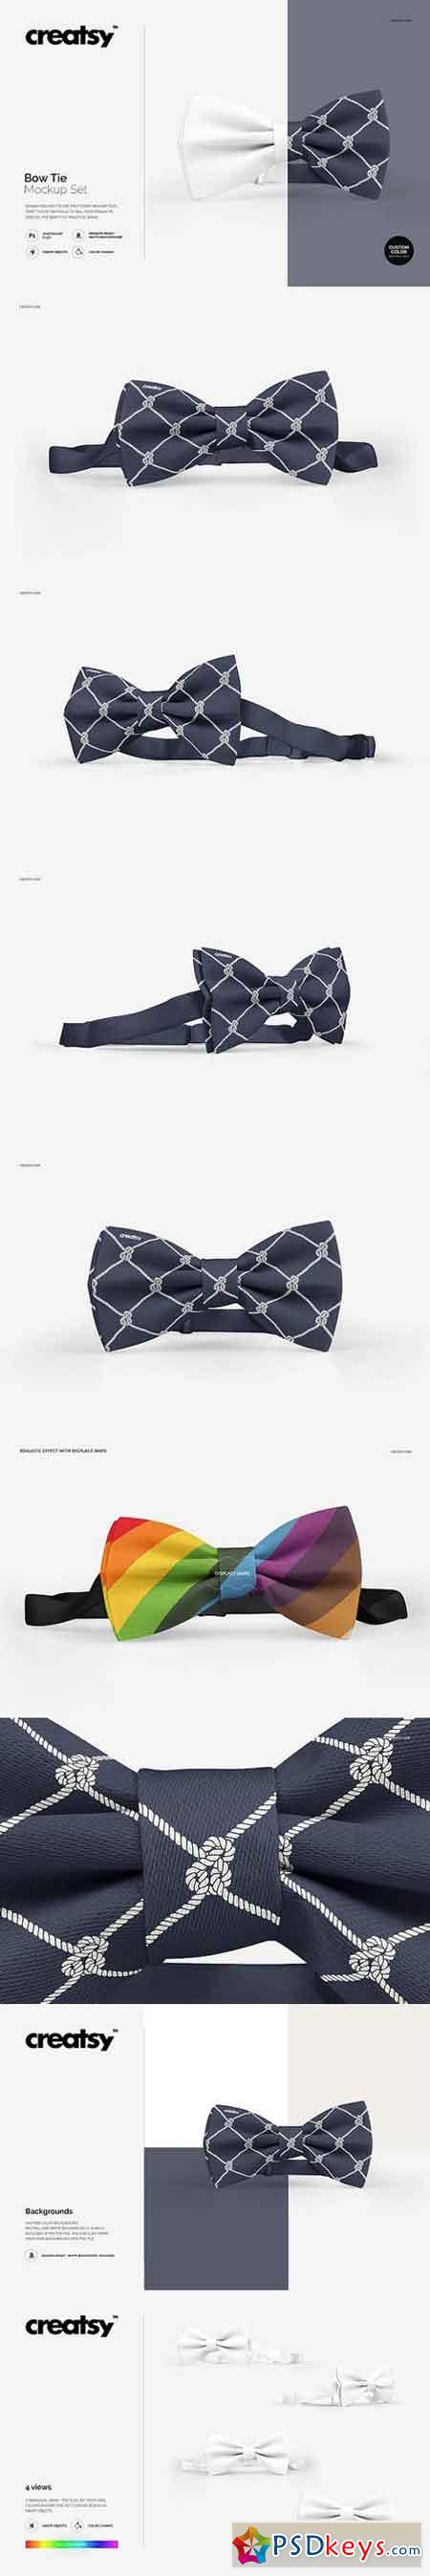 Download Get Silk Bow Tie Mockup Pictures Yellowimages - Free PSD ...